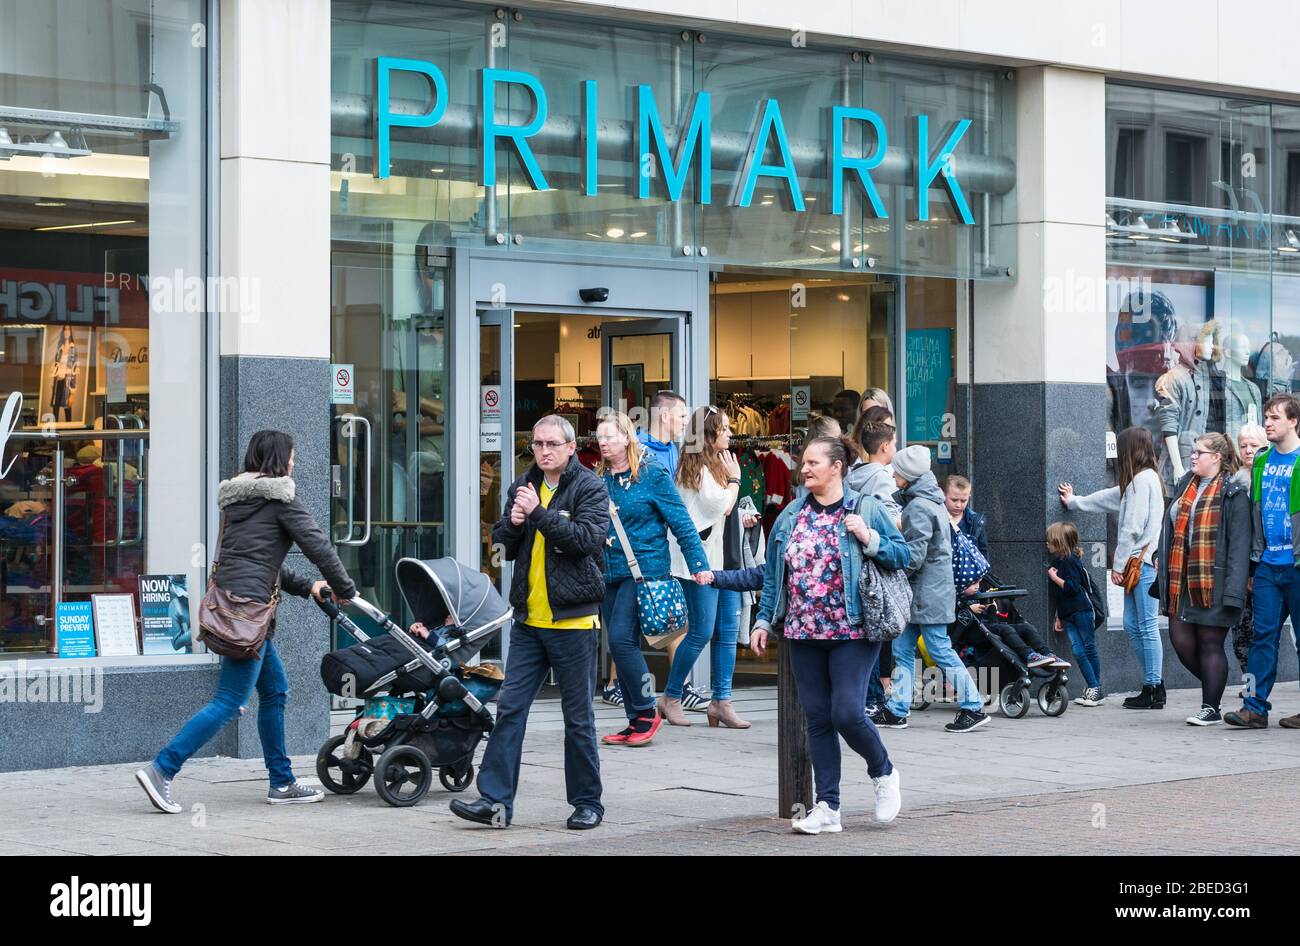 Primark shop front entrance in Brighton, East Sussex, England, UK. Retail store. Stock Photo